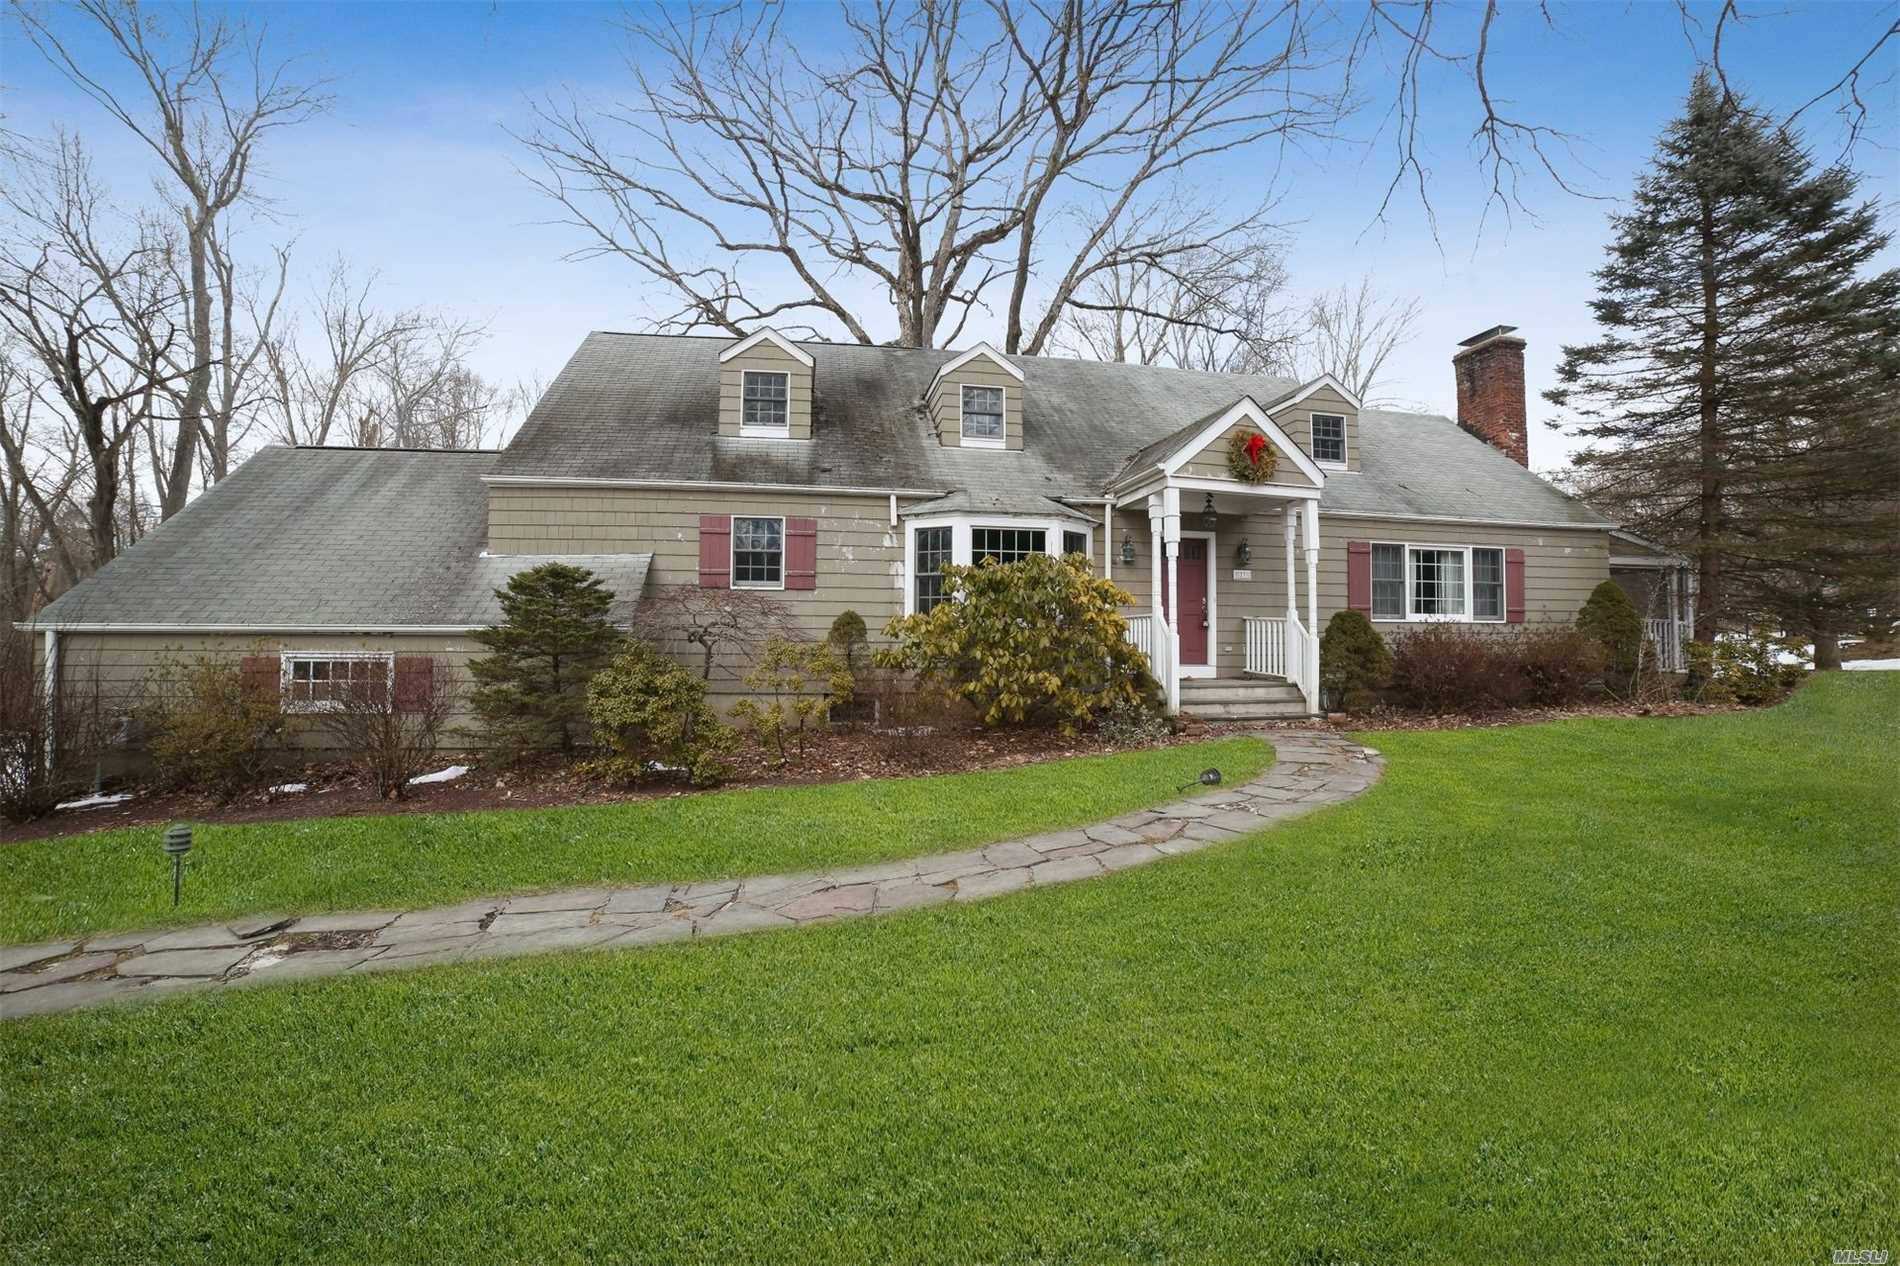 Great huge classic Cape Cod style home.